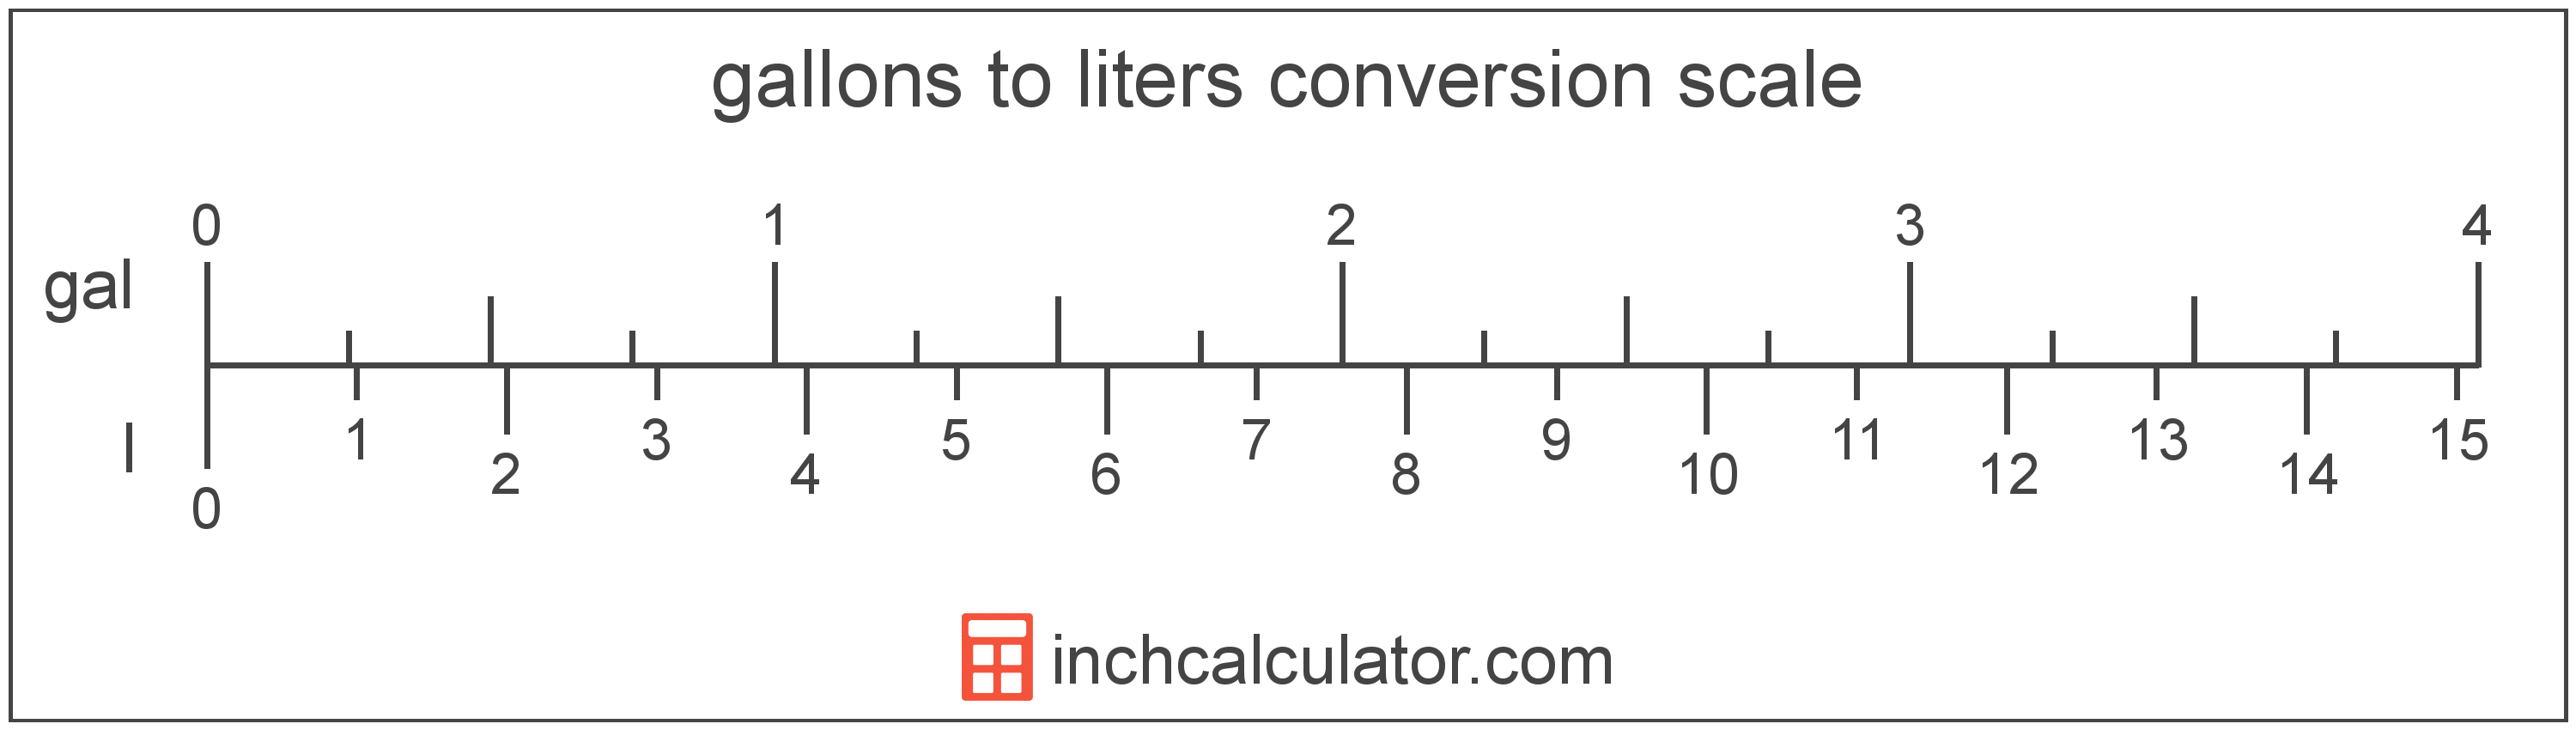 Gallons to Liters Conversion (gal to l) - Inch Calculator